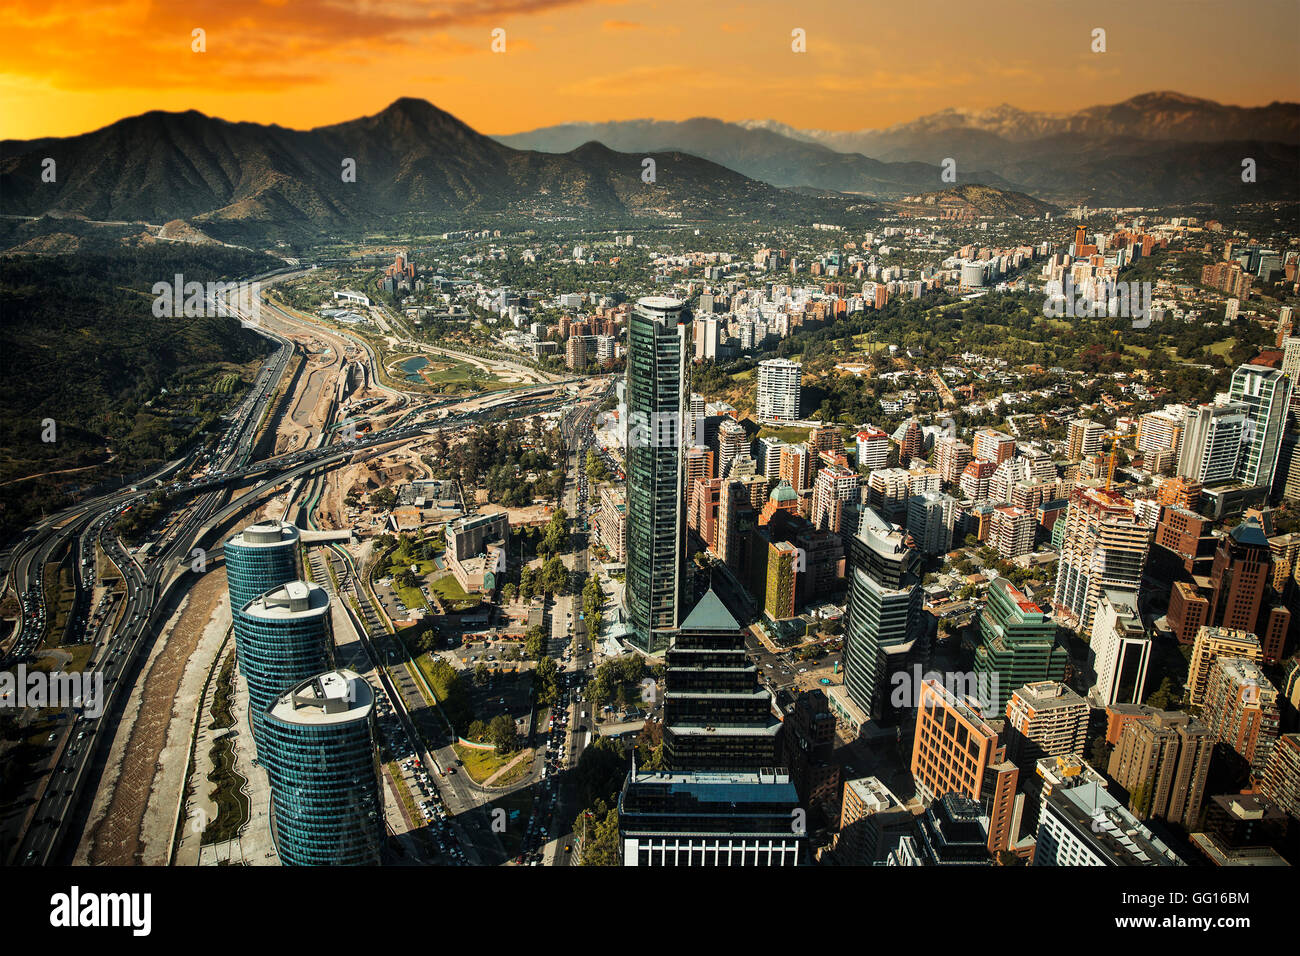 View of Santiago de Chile with Los Andes mountain range in the back Stock Photo